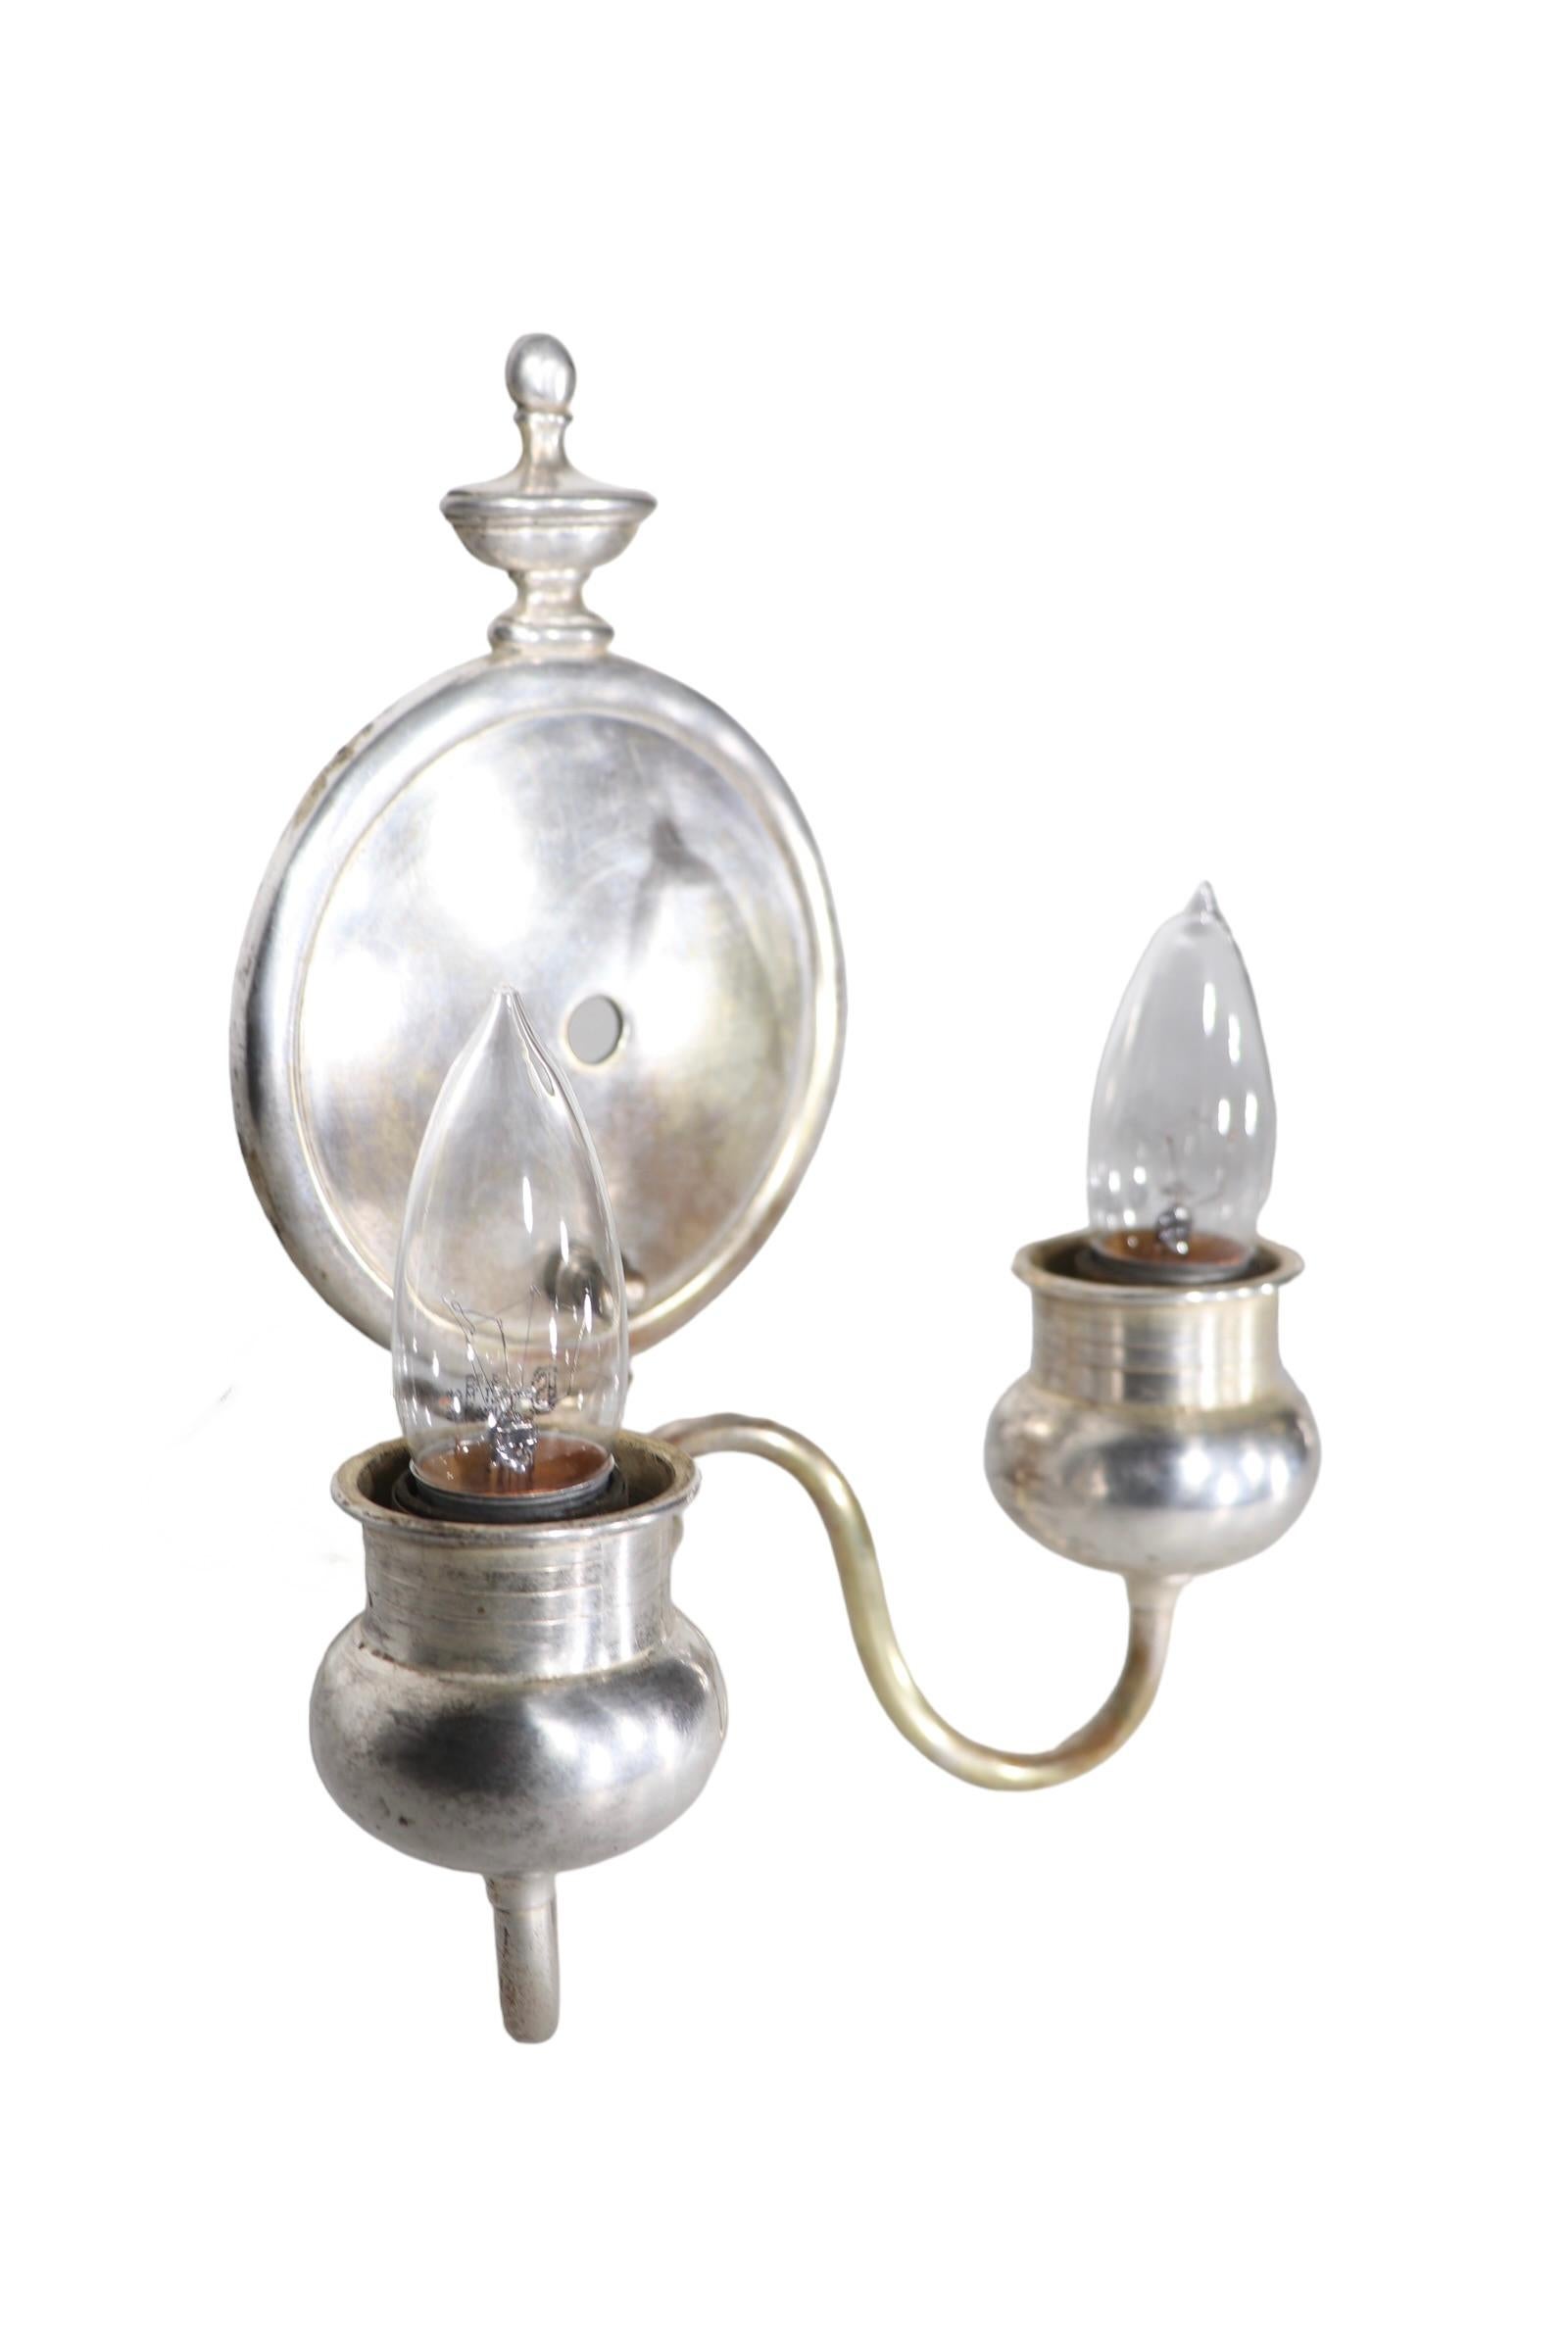 20th Century Pr.  Neo Classical Silver-Plate Sconces  For Sale